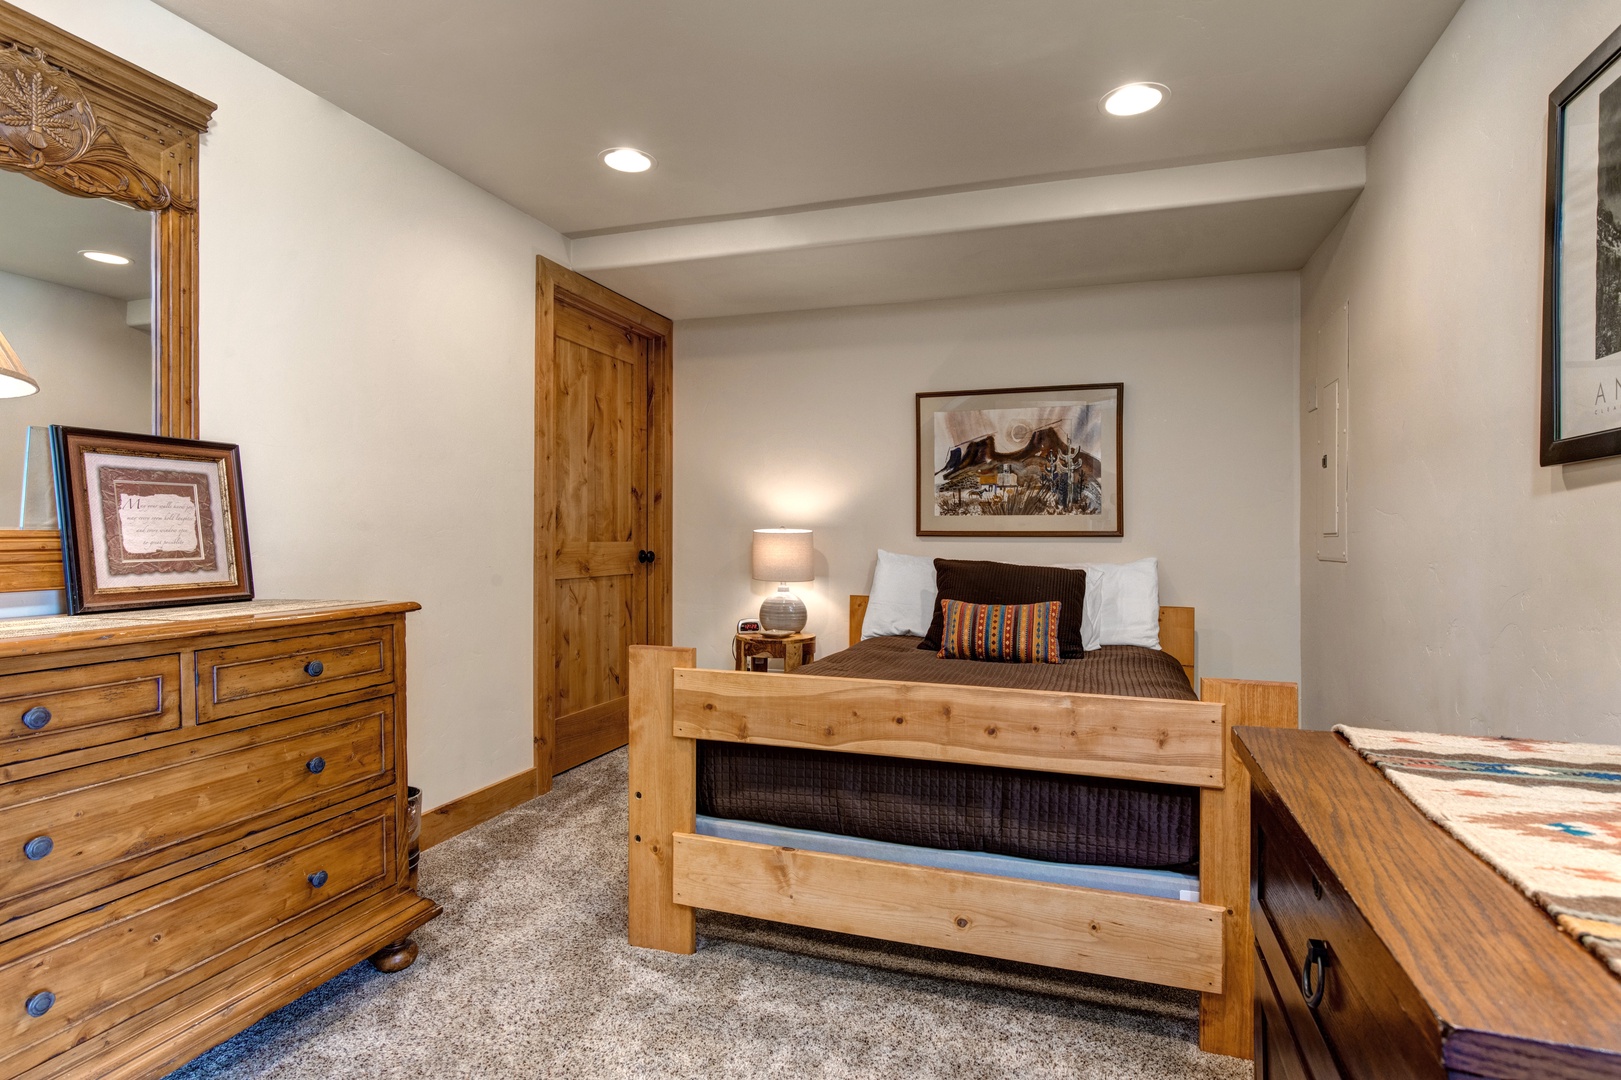 Park City Vacation Rentals, Cedar Ridge Townhouse - Second bedroom with king bed